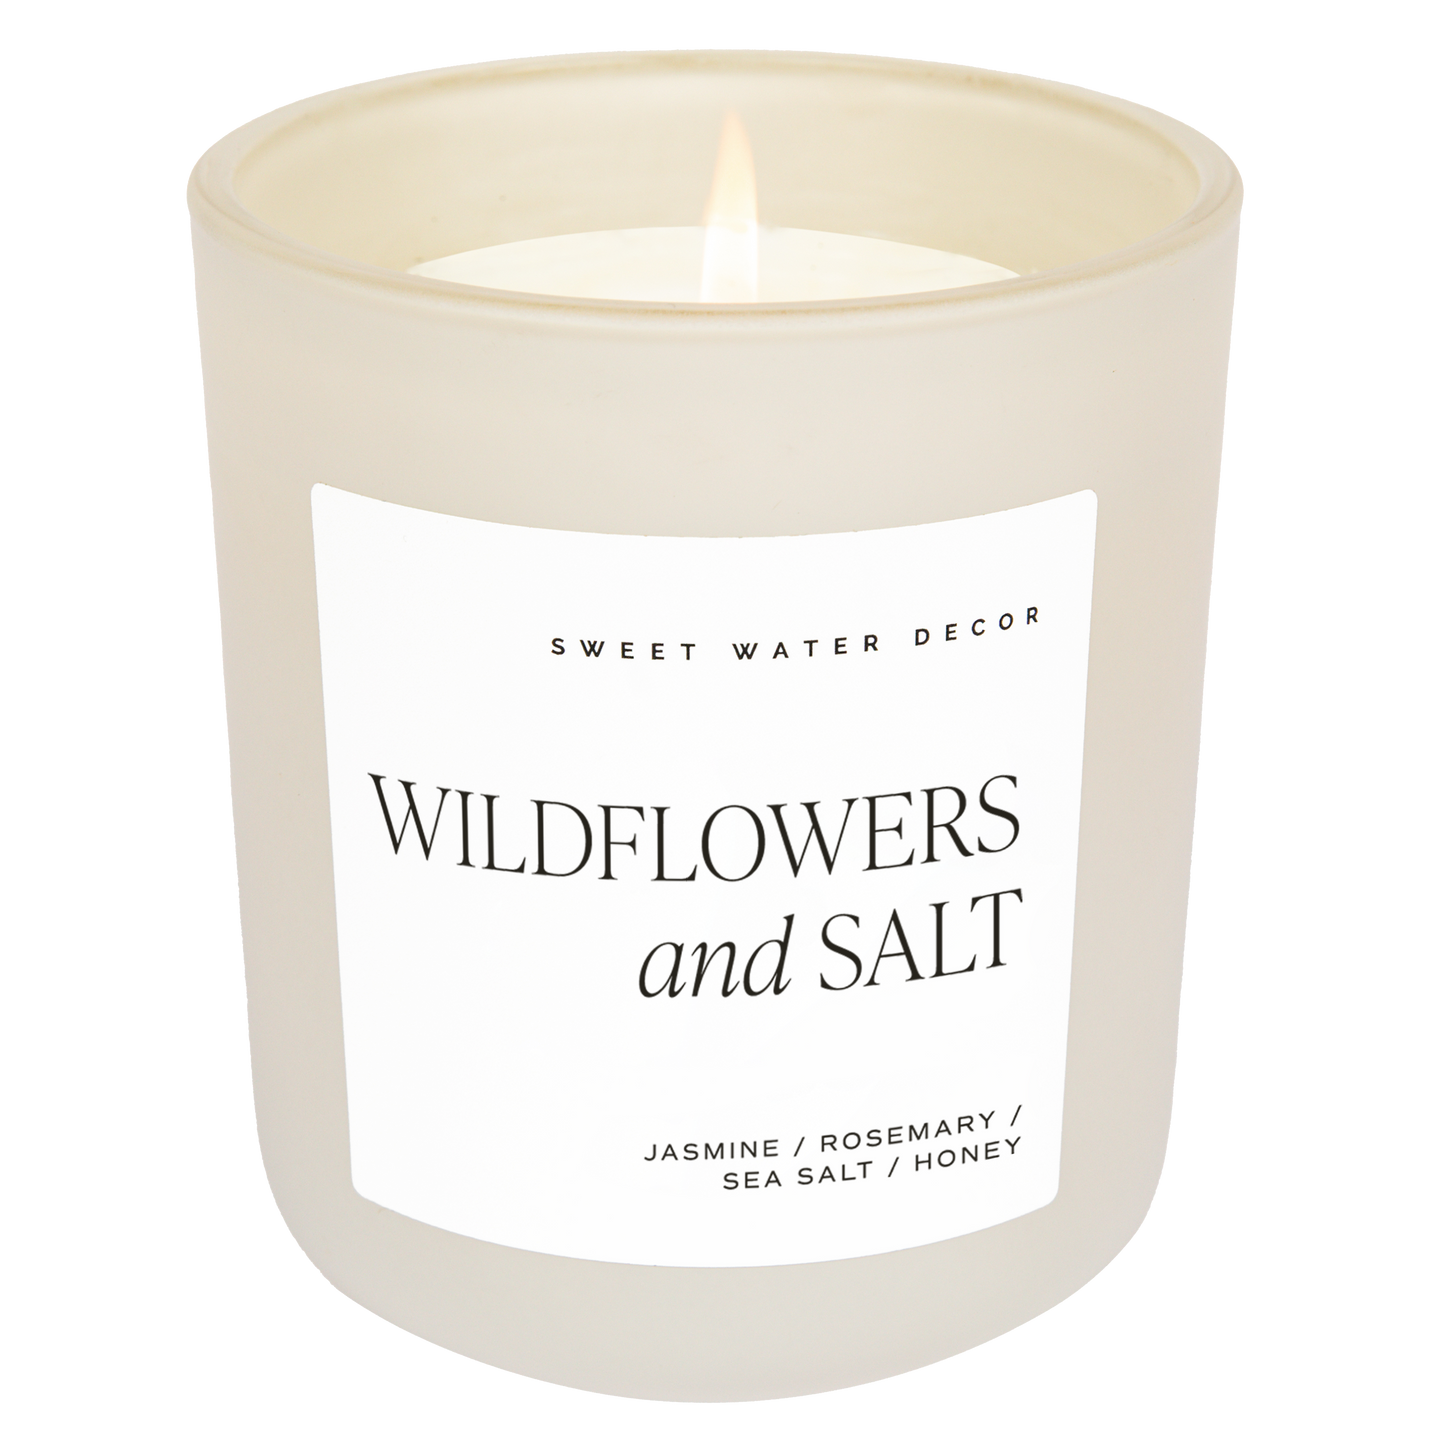 Wildflowers and Salt Soy Candle, 15 oz